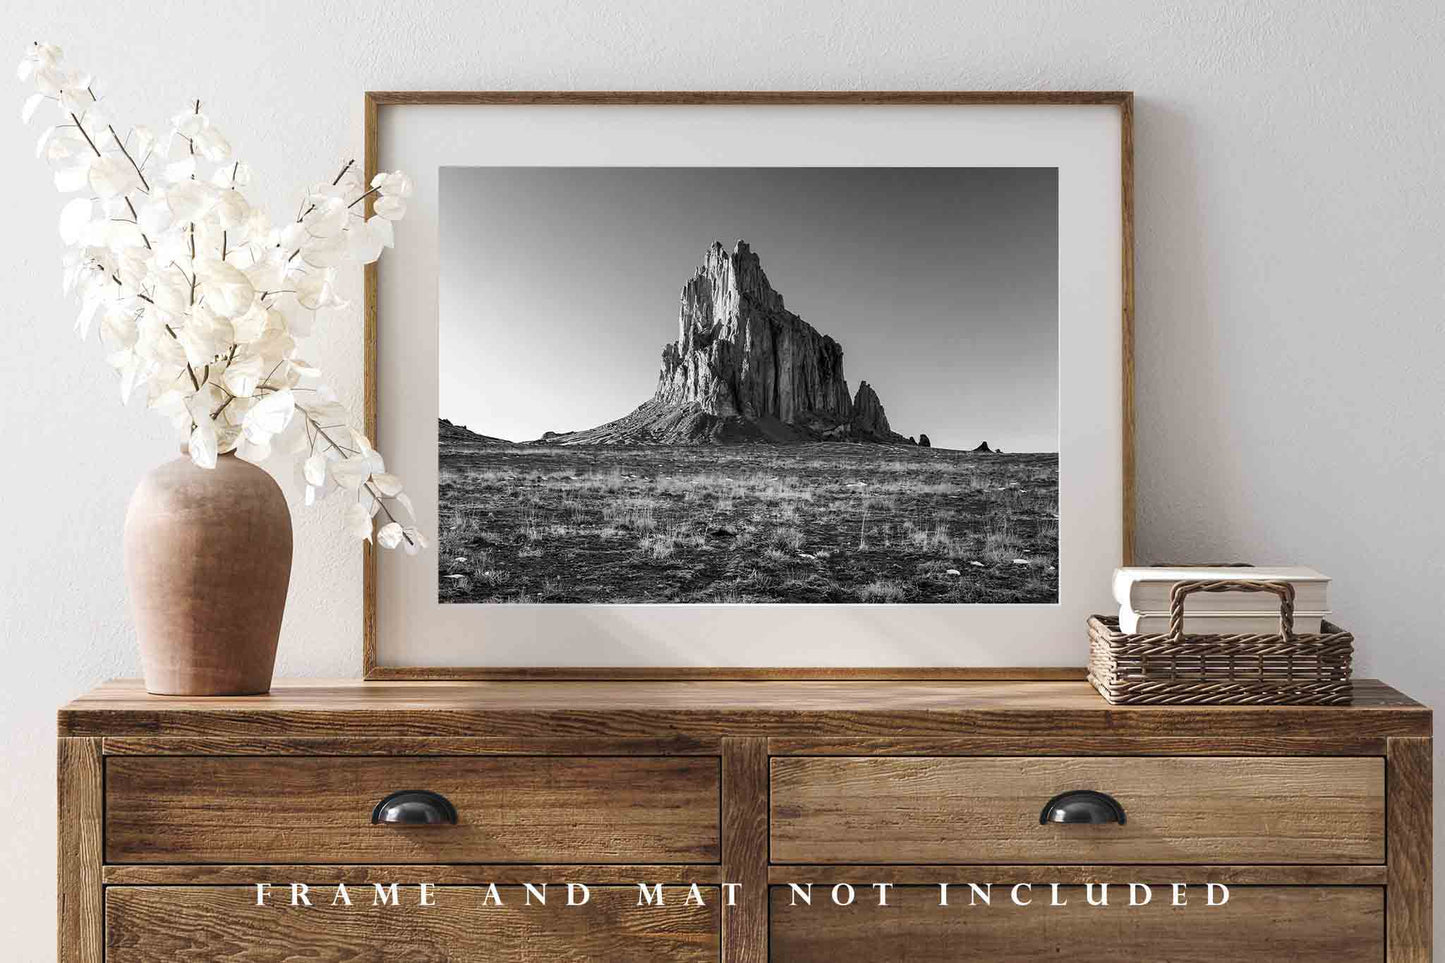 Southwest Photo Print | Shiprock Picture | New Mexico Wall Art | Black and White Landscape Photography | Nature Decor